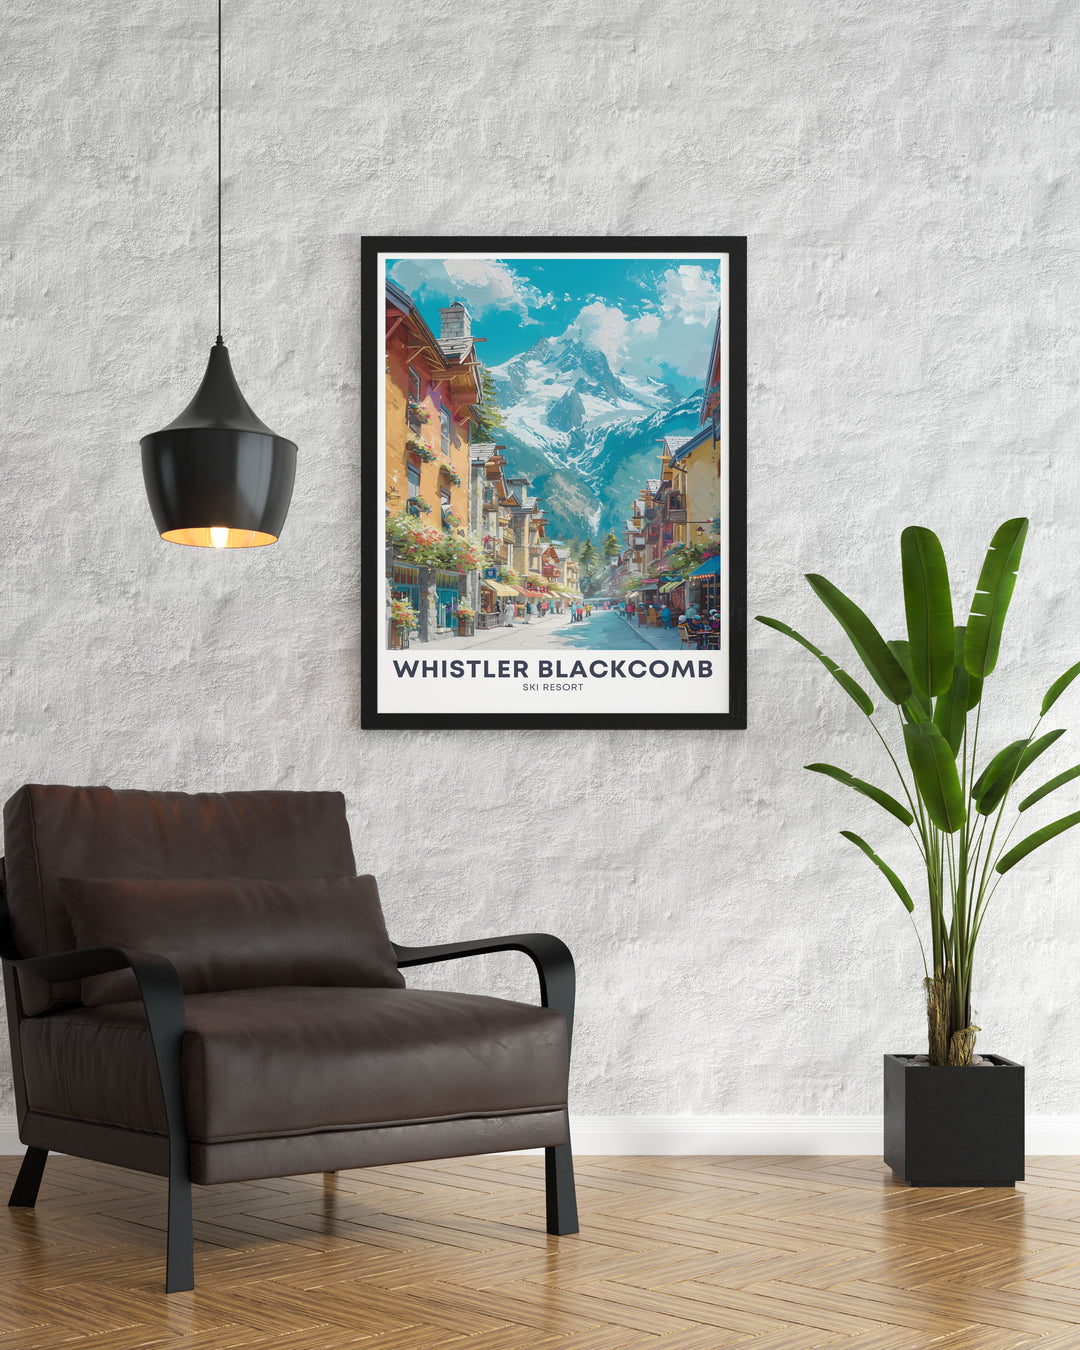 Whistler village poster capturing the essence of Whistler Canada. This vintage ski poster is perfect for anyone who appreciates the beauty of British Columbia BC and wants to add a touch of winter magic to their home.